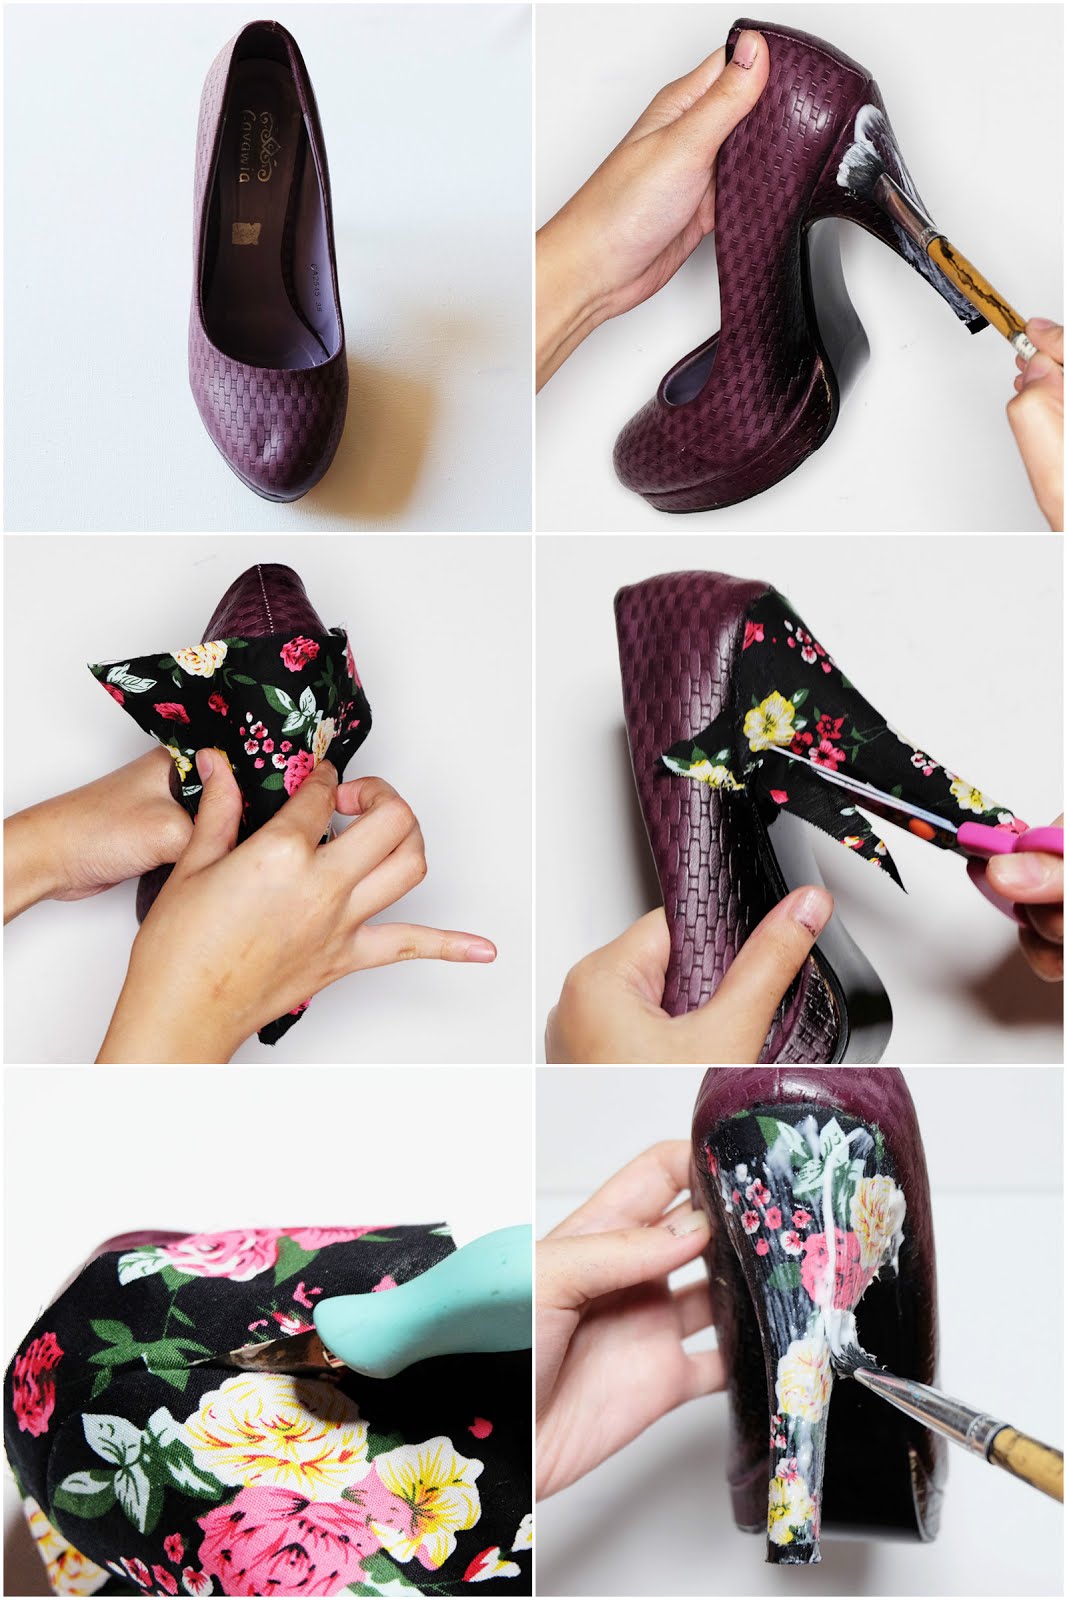 Bash Harry from Hey Bash gives an in-depth tutorial on how to make some DIY Fabric Shoes for under $20 with an old pair of heels